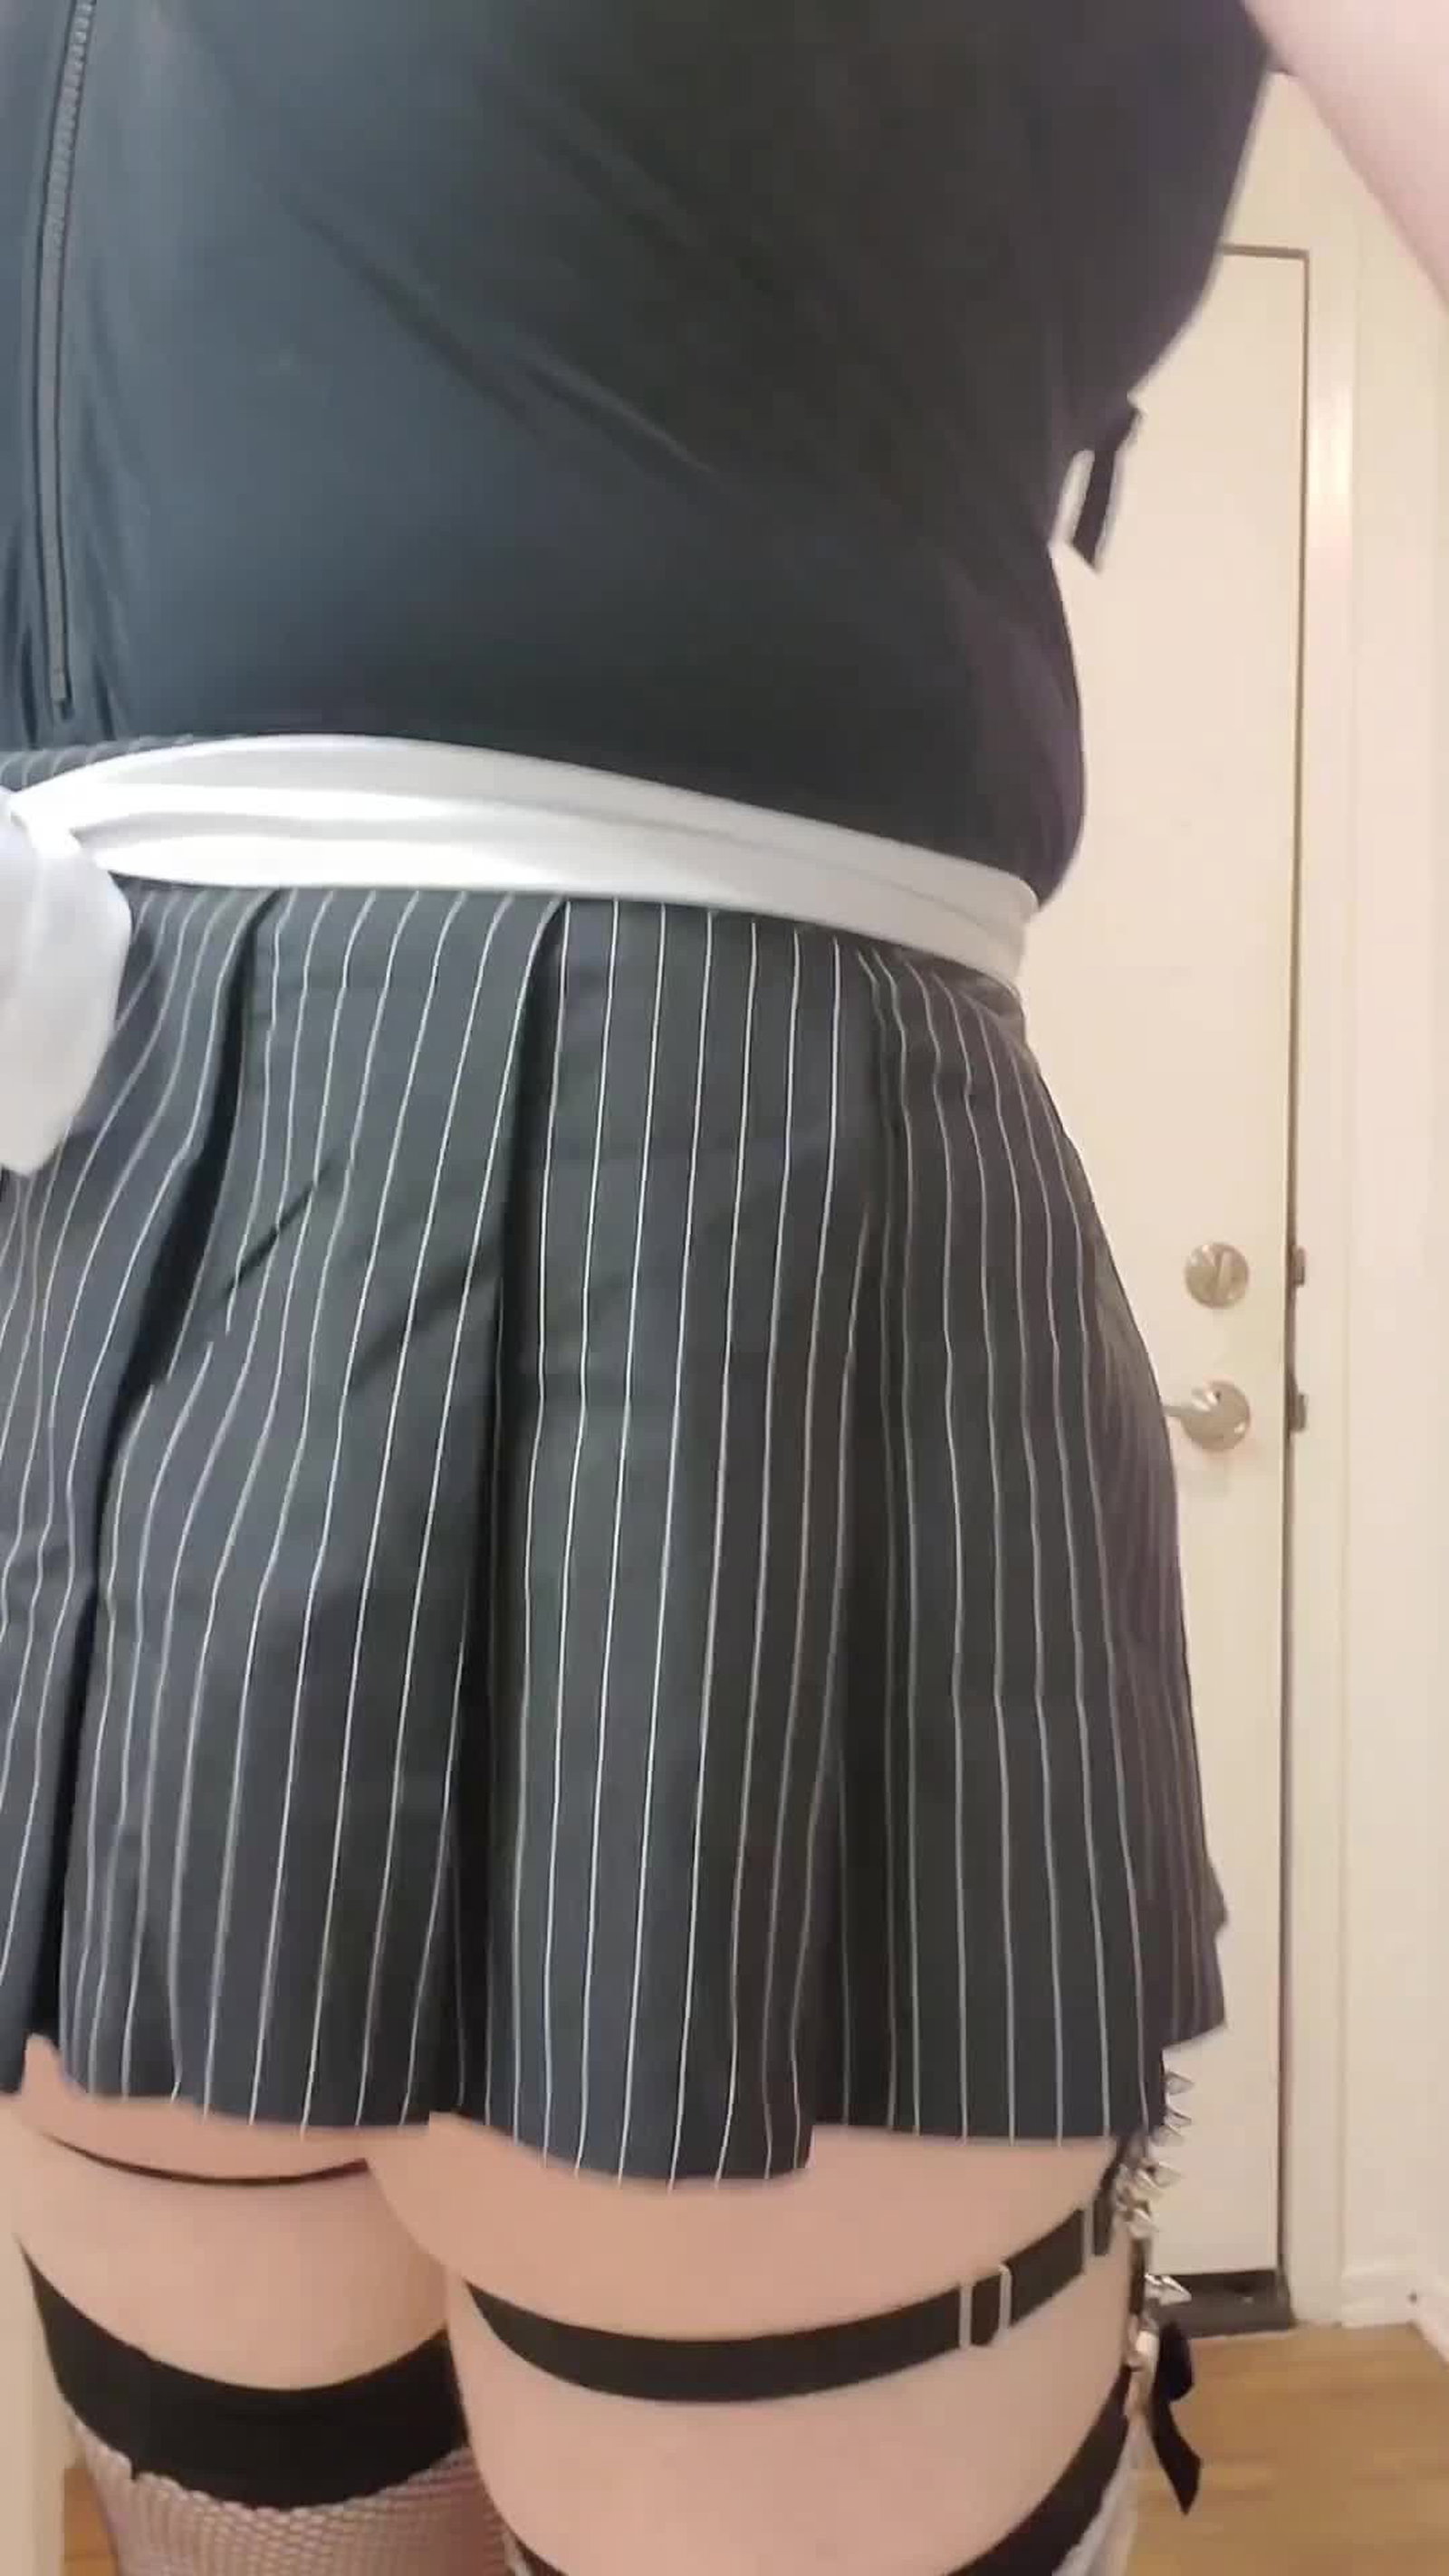 Video by Pussless with the username @Pussless, who is a star user,  January 2, 2024 at 4:22 AM. The post is about the topic Sissy and the text says 'Sissy Maid Pussless
👗 LittleForBig'